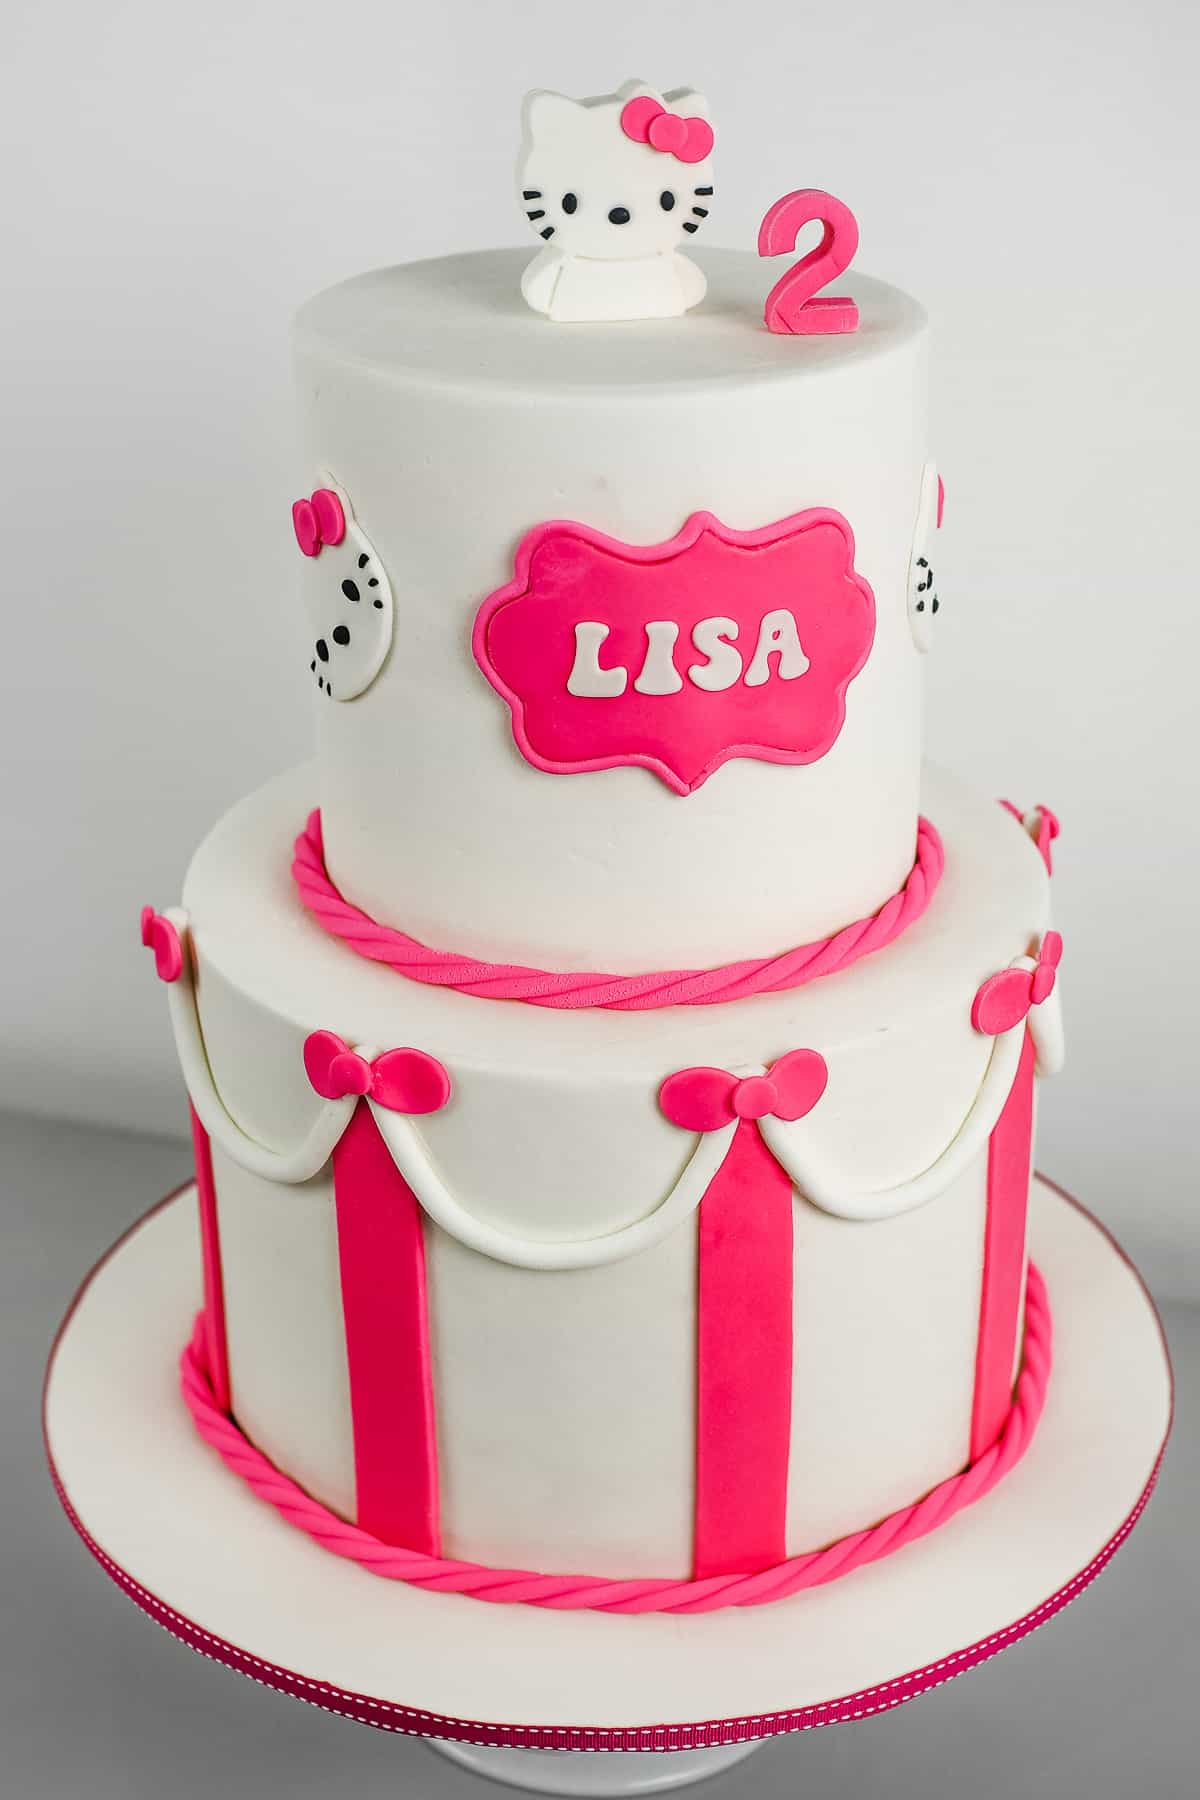 A white and pink 2 tier Hello Kitty Birthday cake